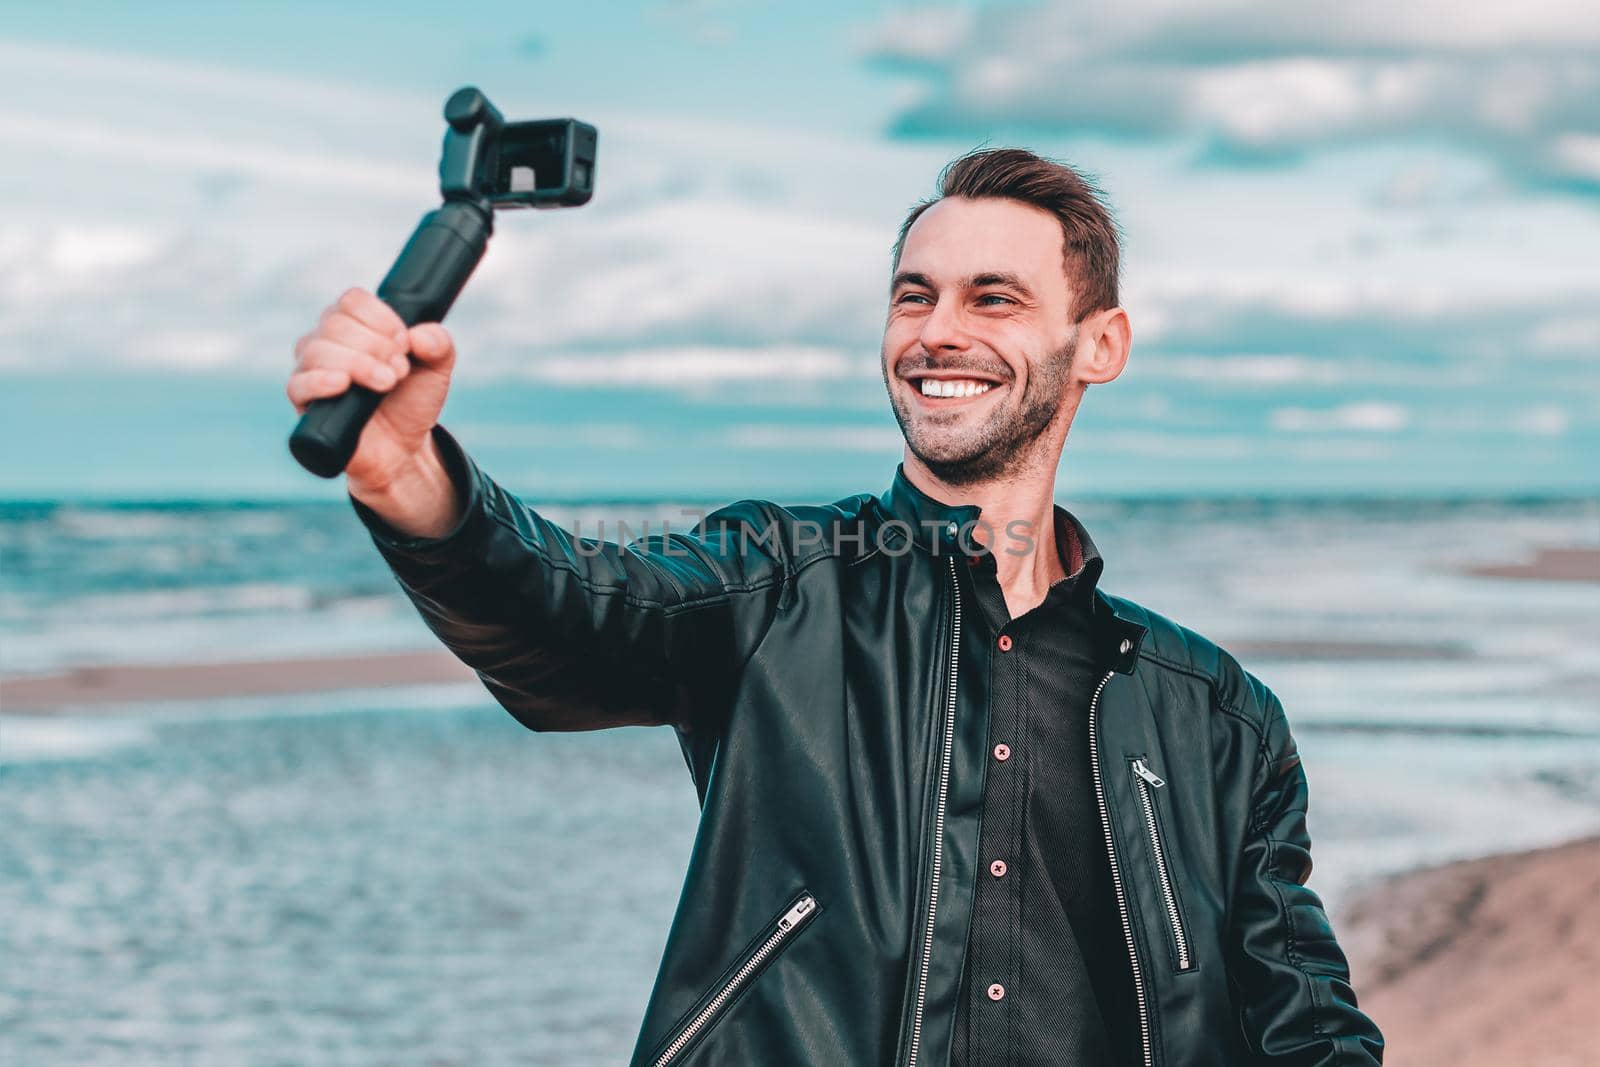 Smiling Young Male Blogger Making Selfie or Streaming Video at the Beach Using Action Camera with Gimbal Camera Stabilizer. Man in Black Clothes Making Photo Against the Sea